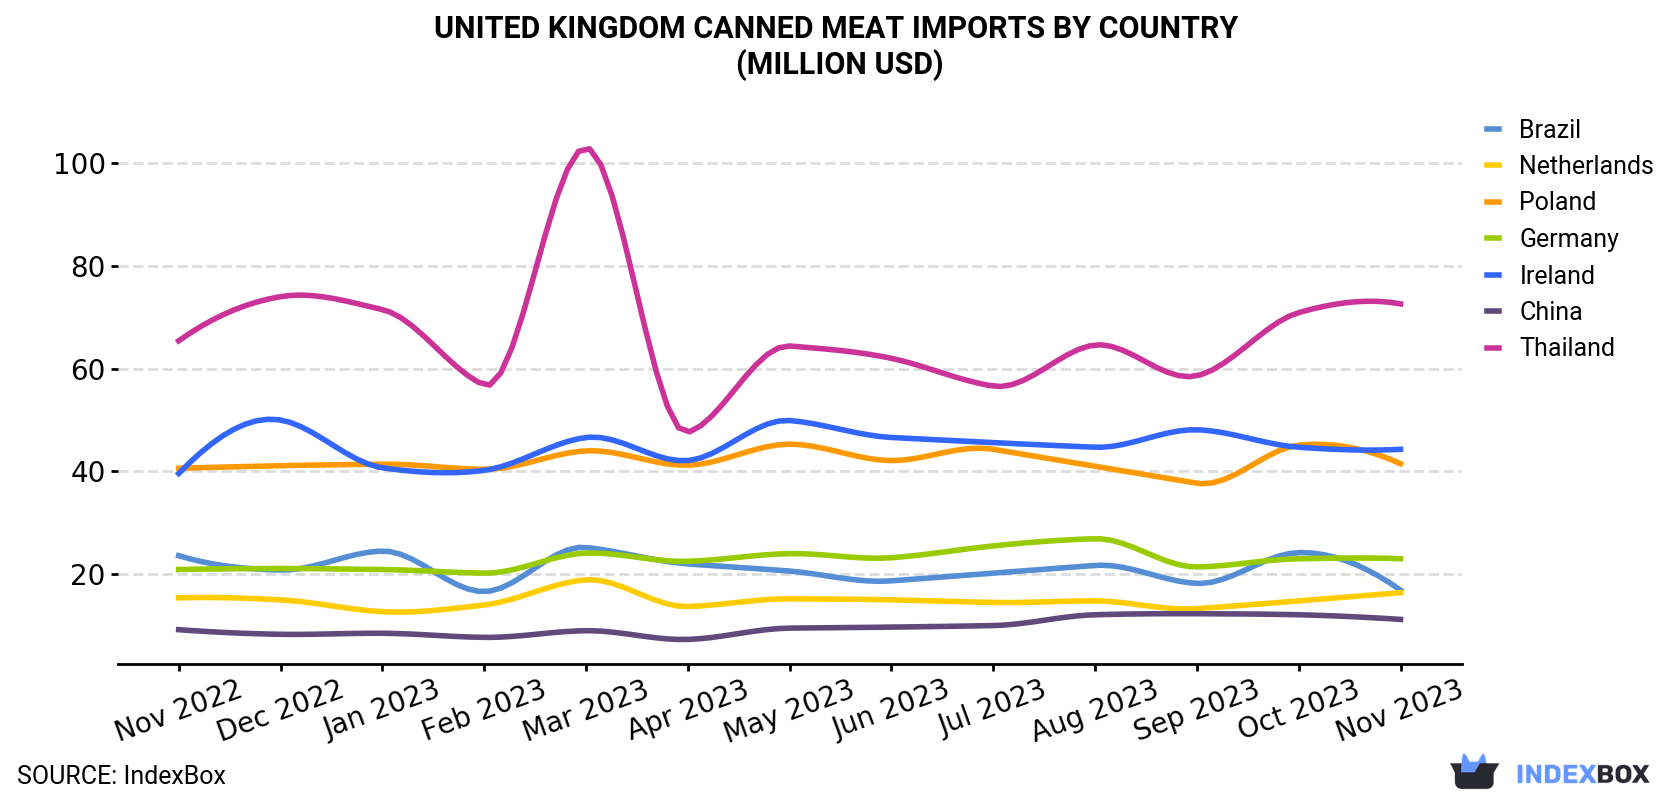 United Kingdom Canned Meat Imports By Country (Million USD)